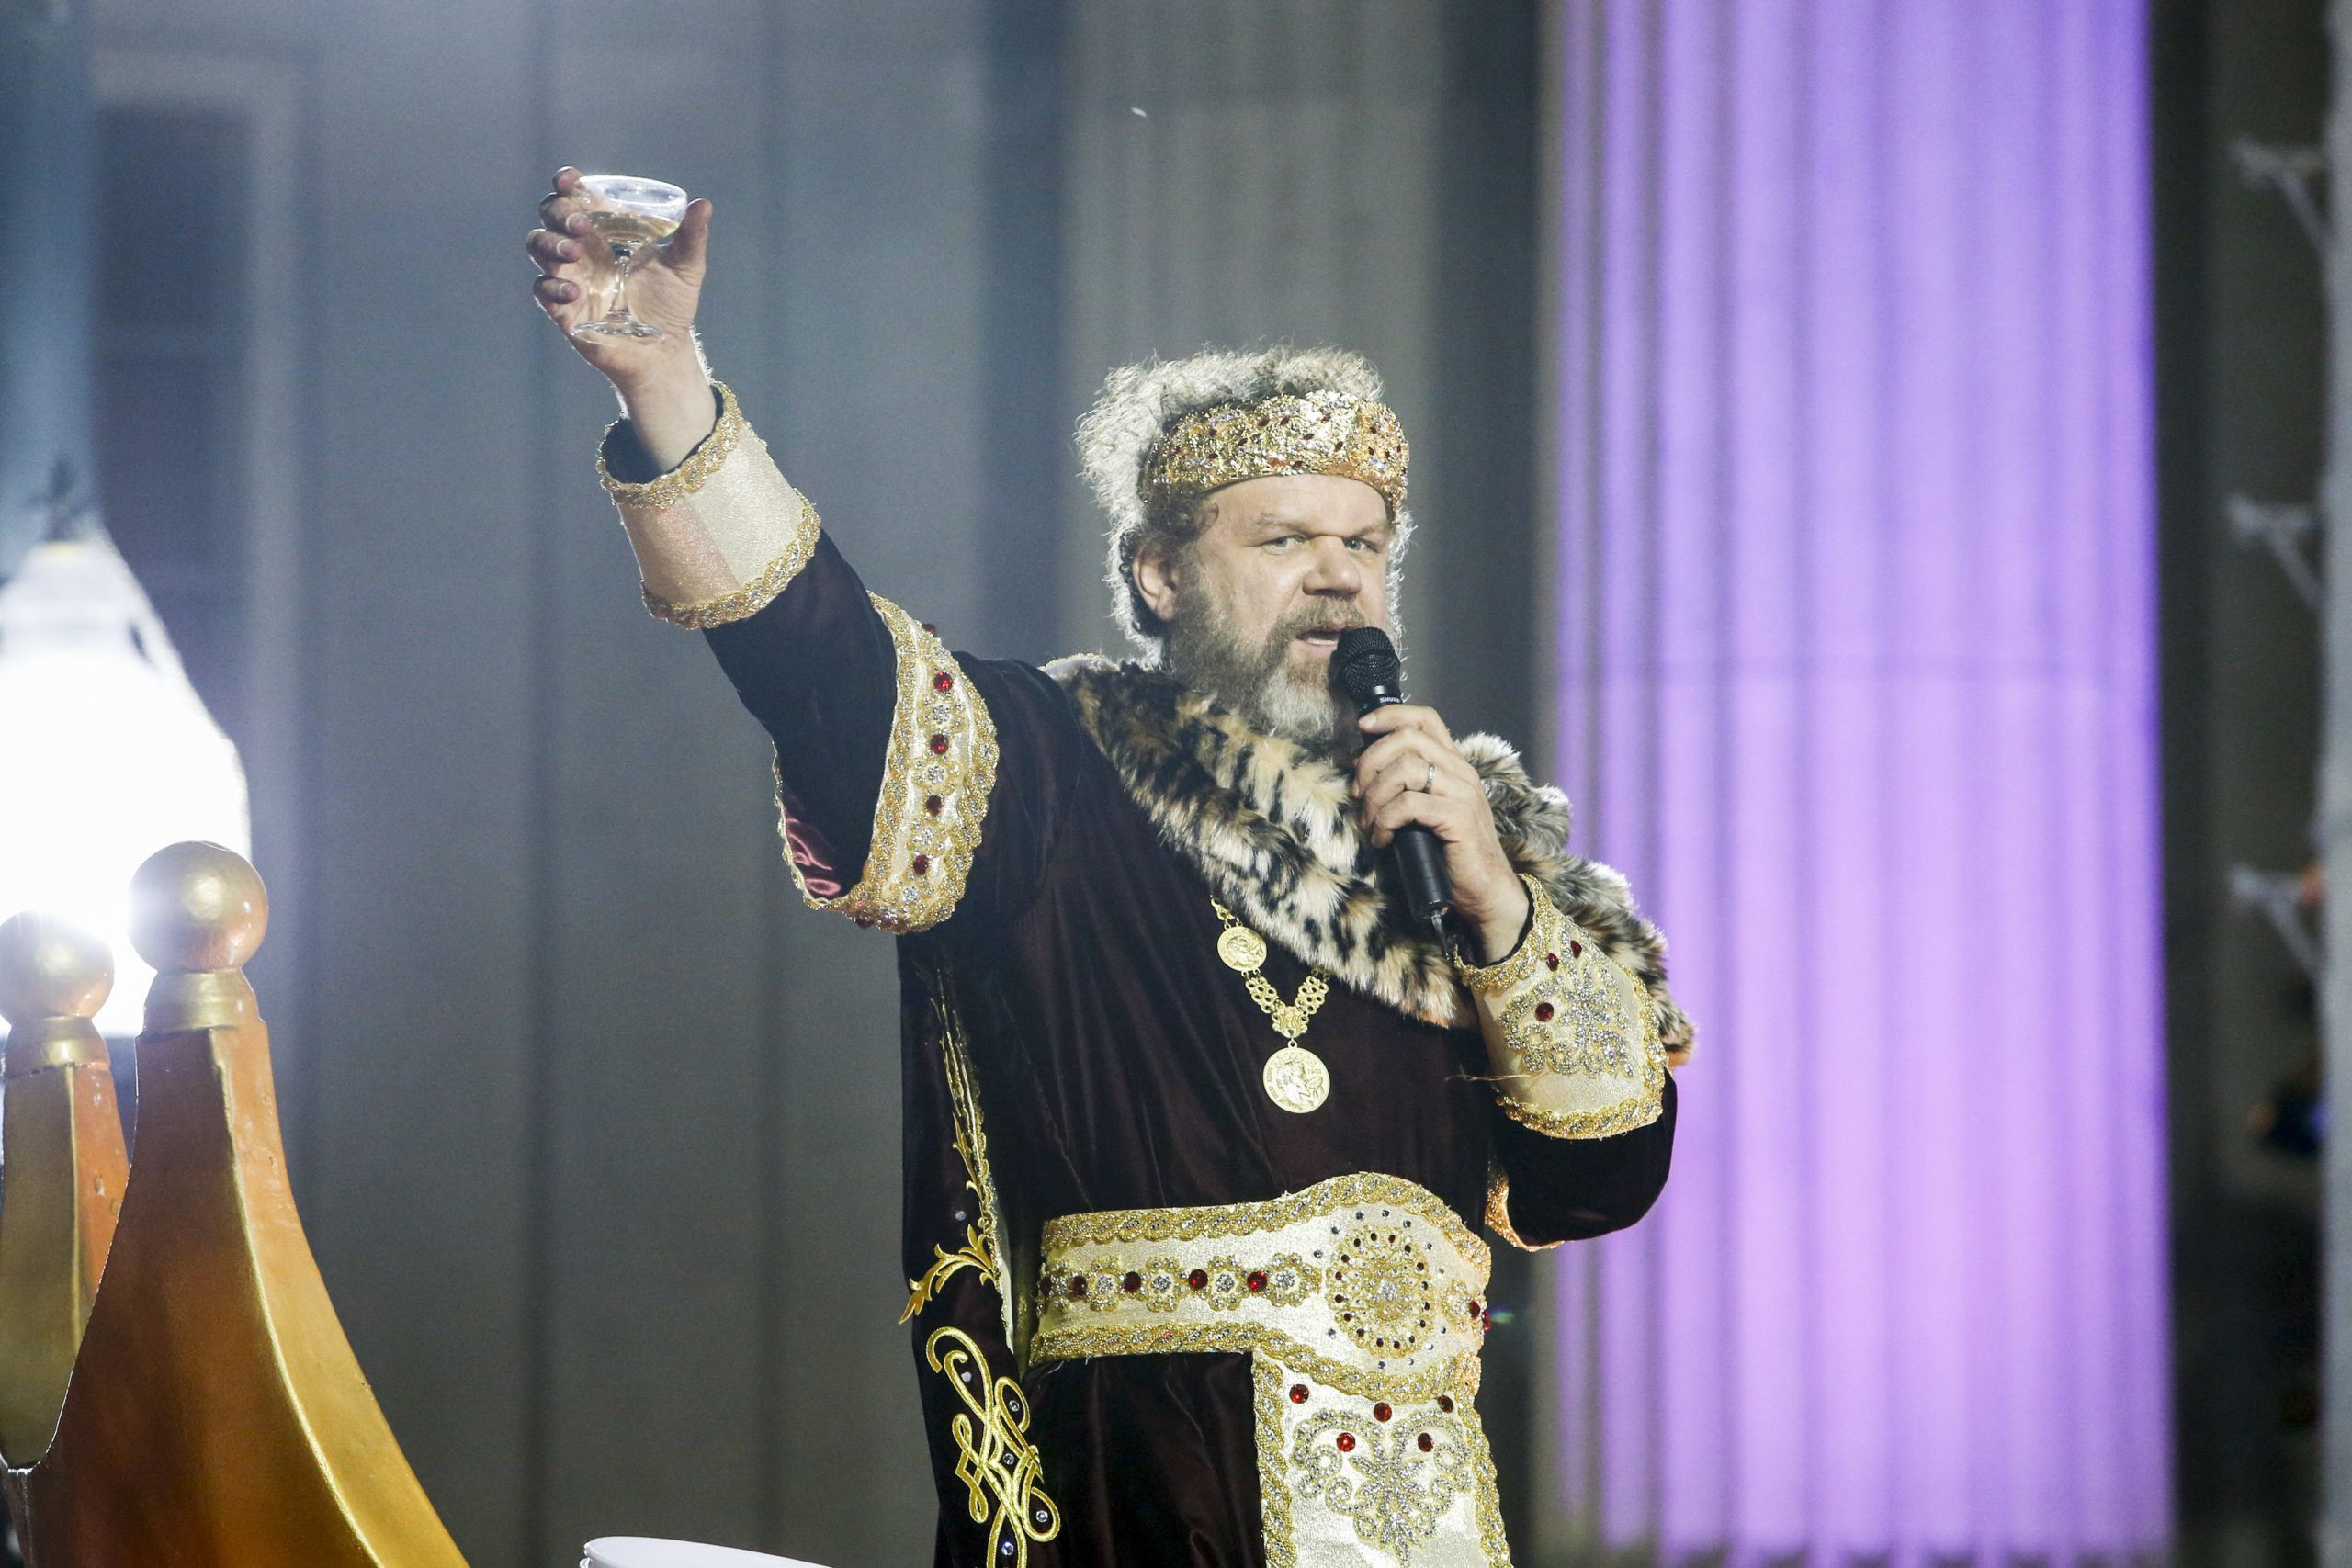 NEW ORLEANS, LA - FEBRUARY 15: Actor John C. Reilly holds up a glass of champagne to toast as he reigns as Bacchus XLVI in the Krewe of Bacchus parade during Mardi Gras on February 15, 2015 in New Orleans, Louisiana. (Photo by Skip Bolen/WireImage)